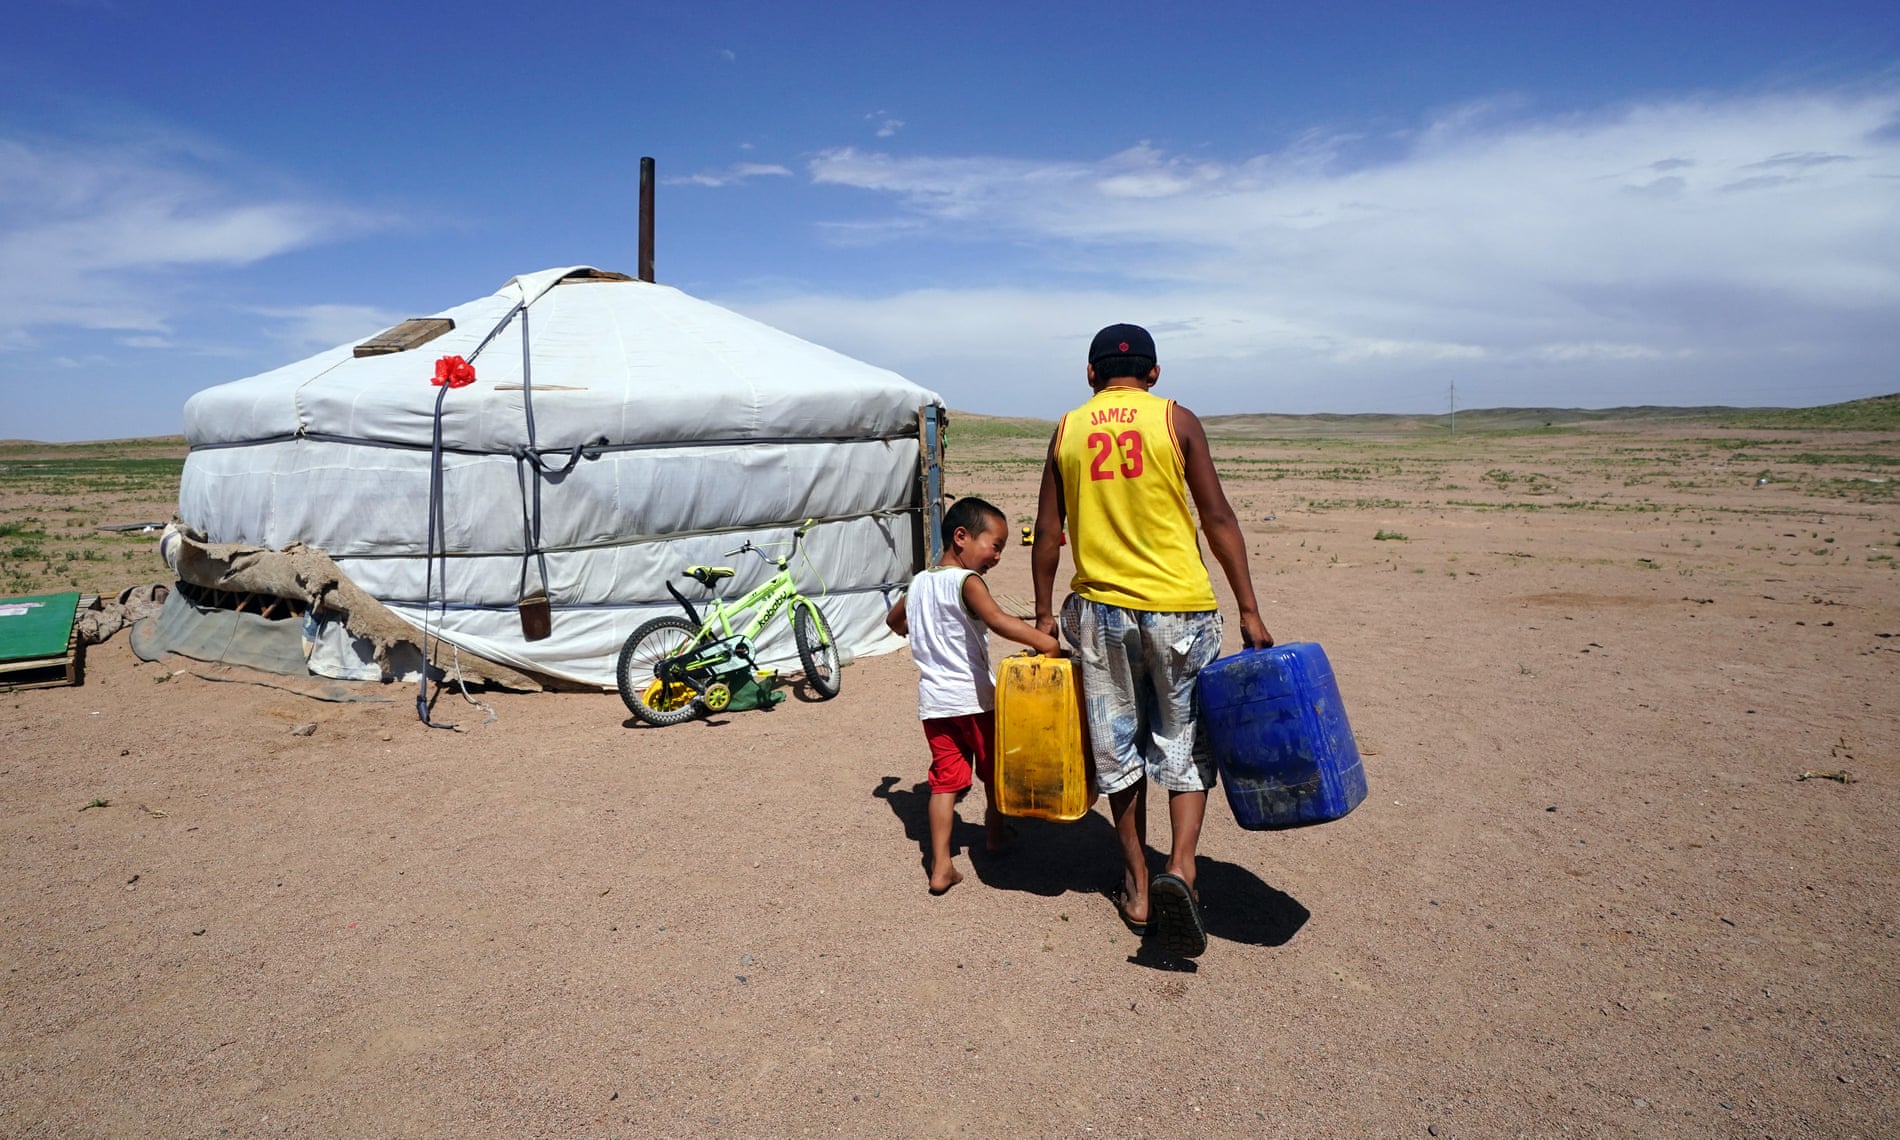 Orgilbayar and his little brother Munkhbat carry water to their father’s ger in Khanbogd Sum, southern Gobi, Mongolia. The Oyu Tolgoi mine is visible in the background